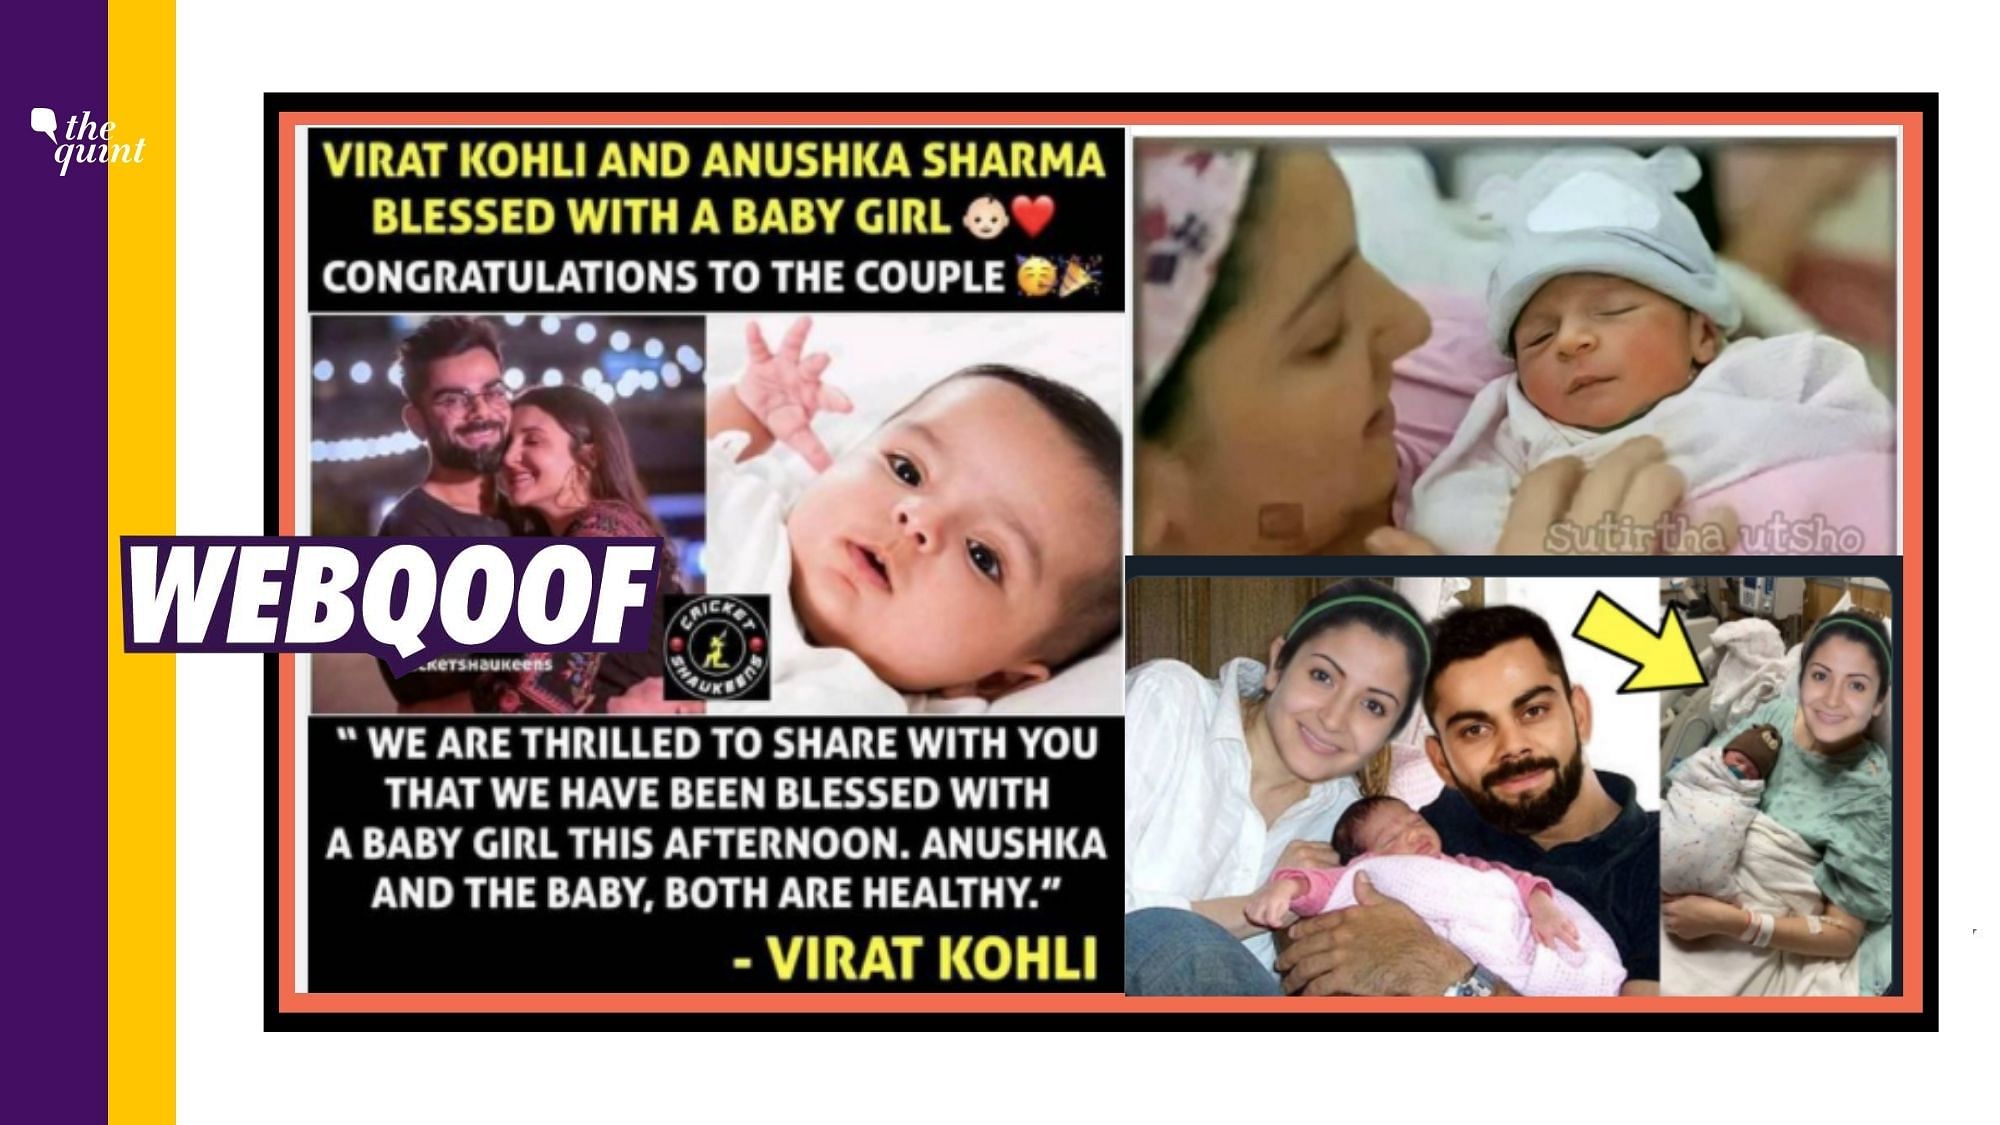 A set of images is being shared on the internet with a claim that they show Virat Kohli and Anushka Sharma’s newborn baby.